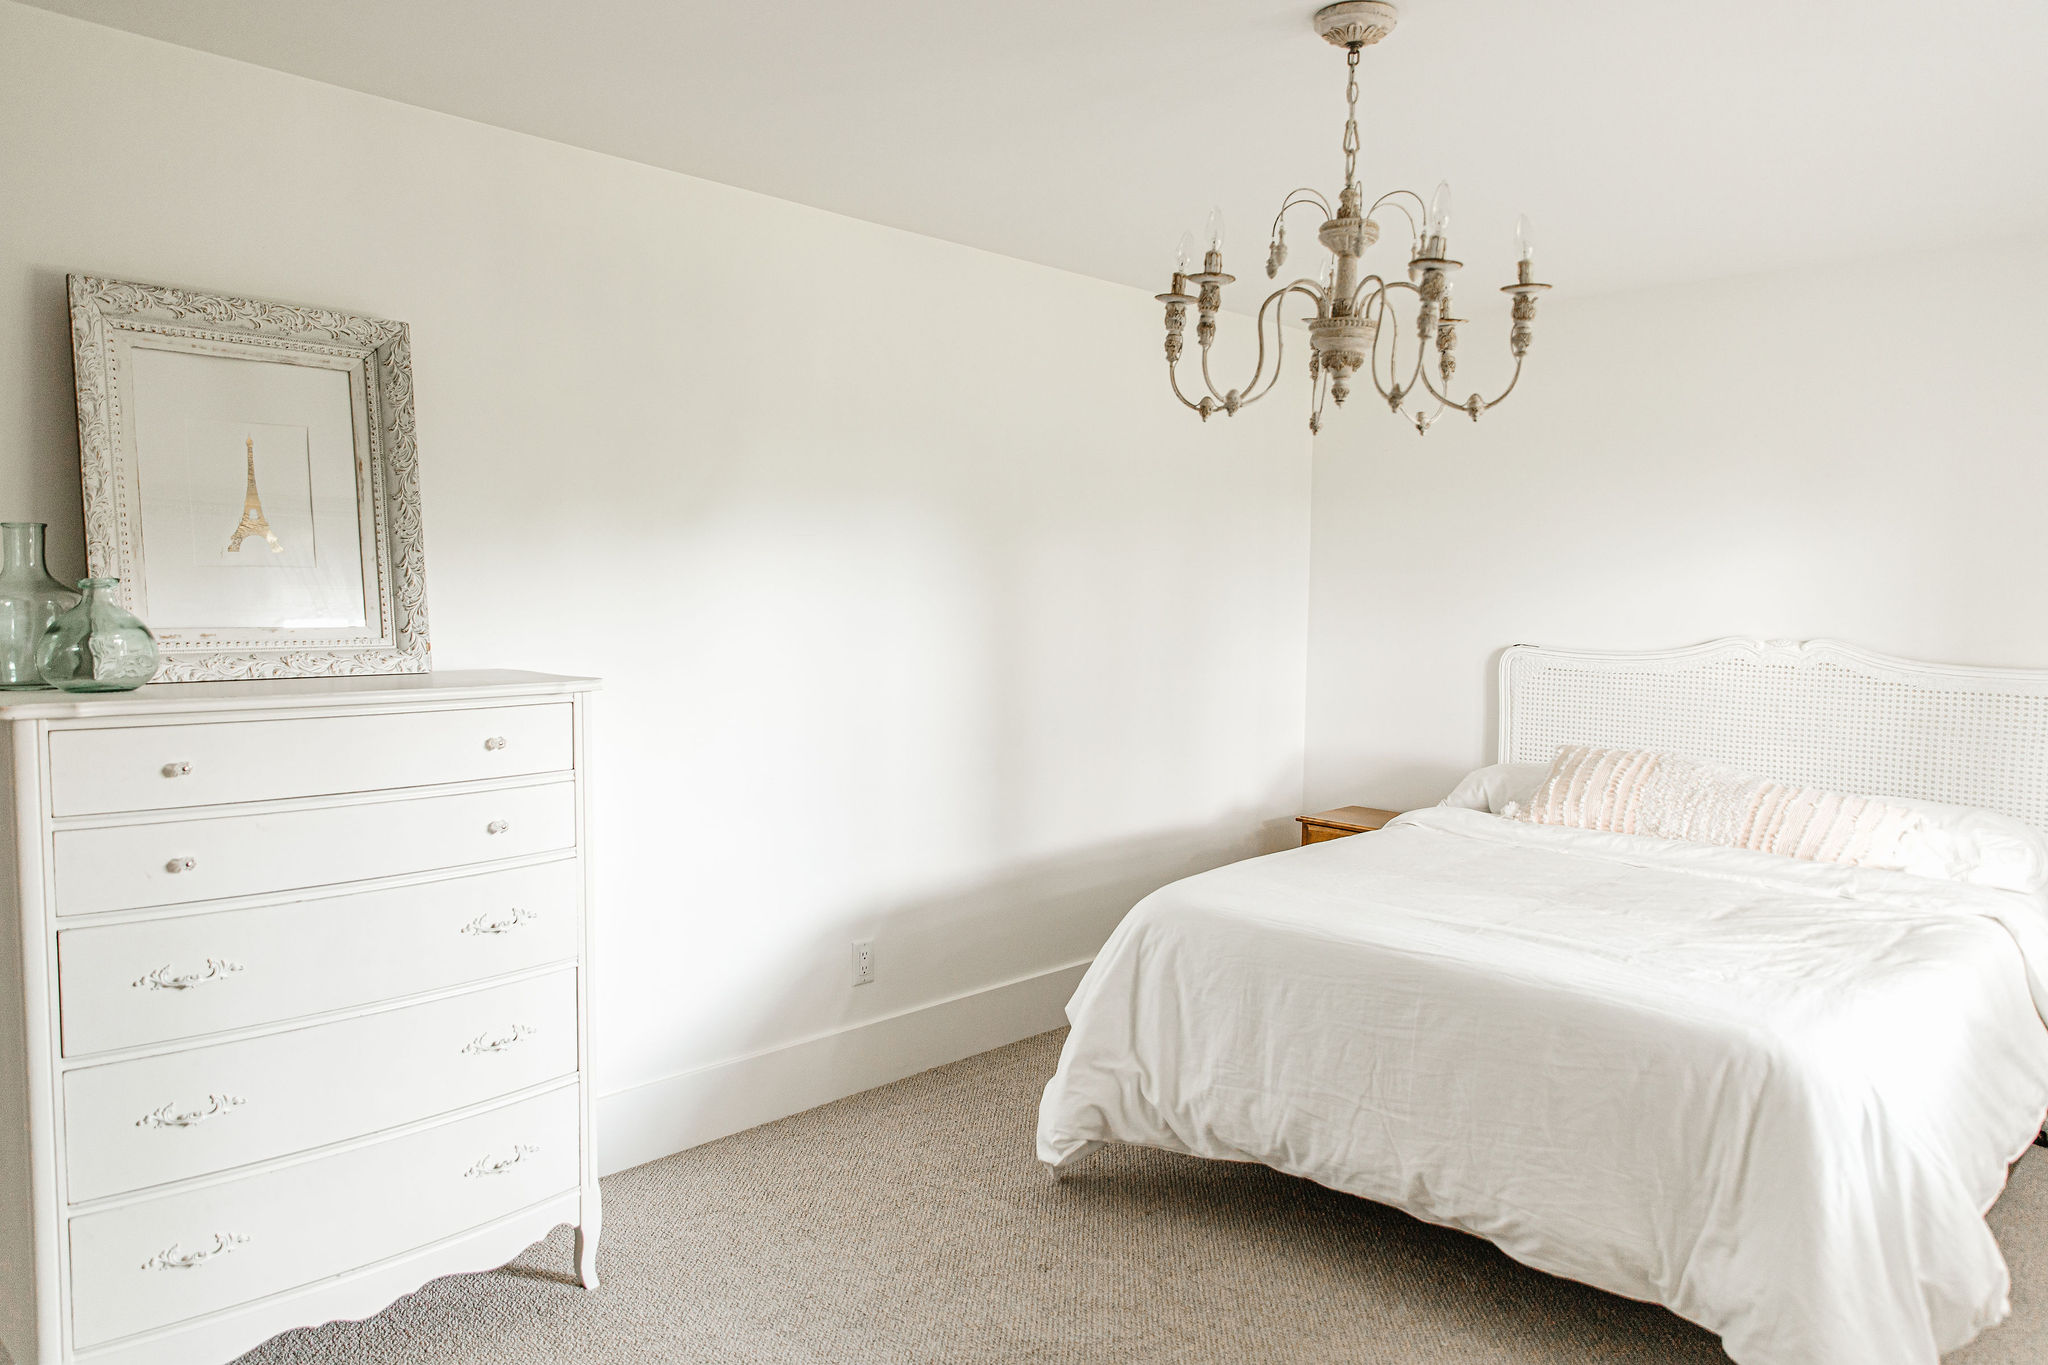 Our Spare Bedroom Reveal - the full renovation transformation